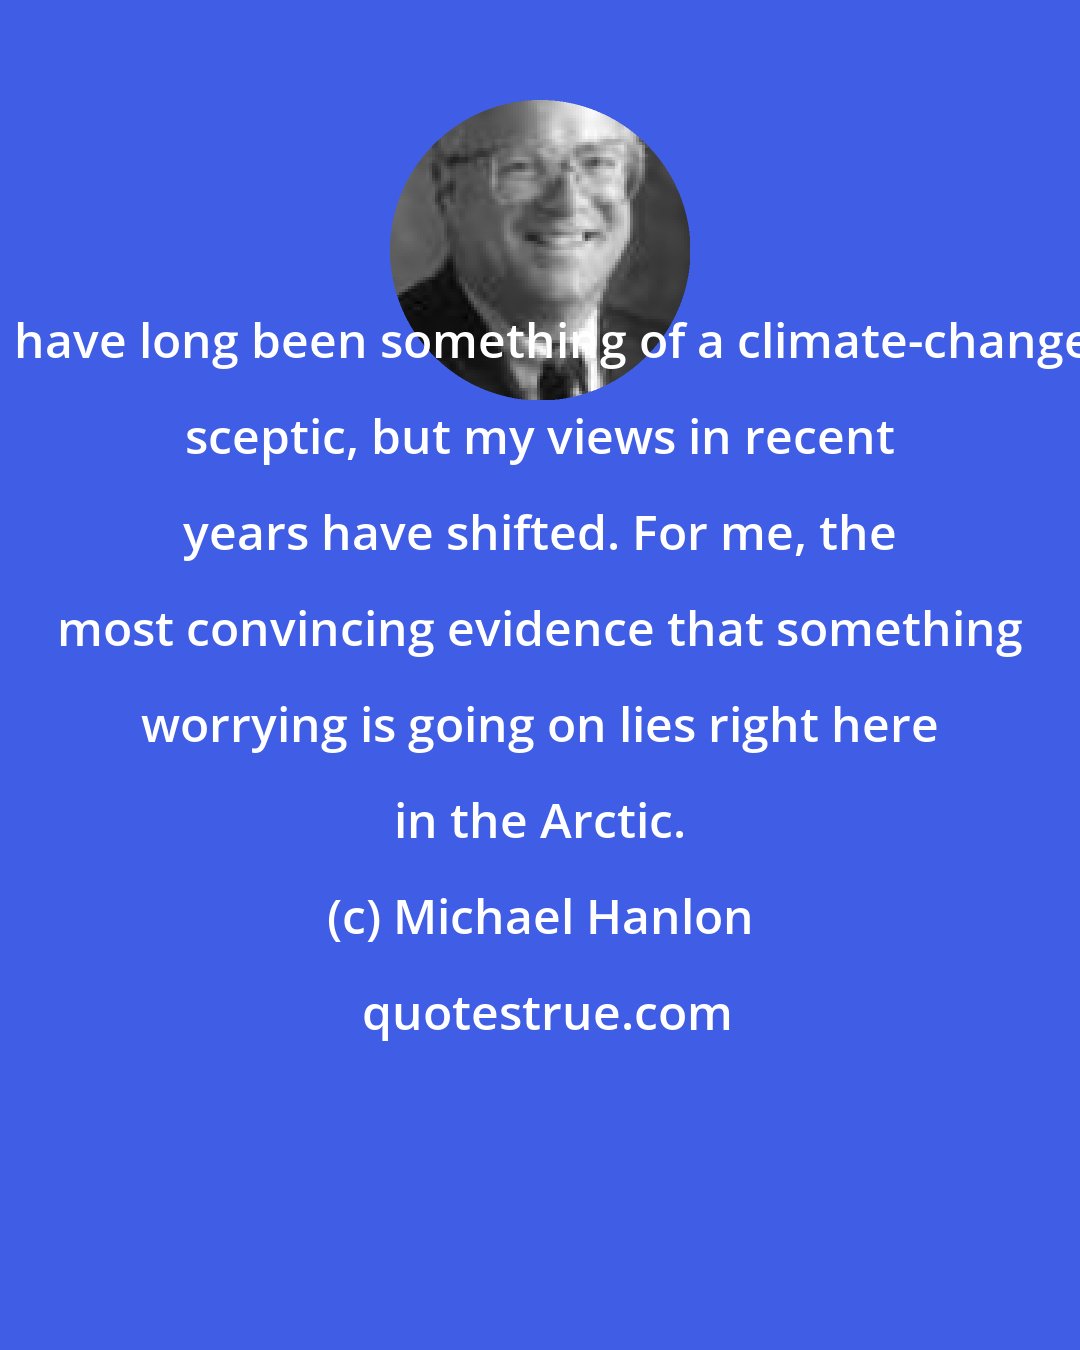 Michael Hanlon: I have long been something of a climate-change sceptic, but my views in recent years have shifted. For me, the most convincing evidence that something worrying is going on lies right here in the Arctic.